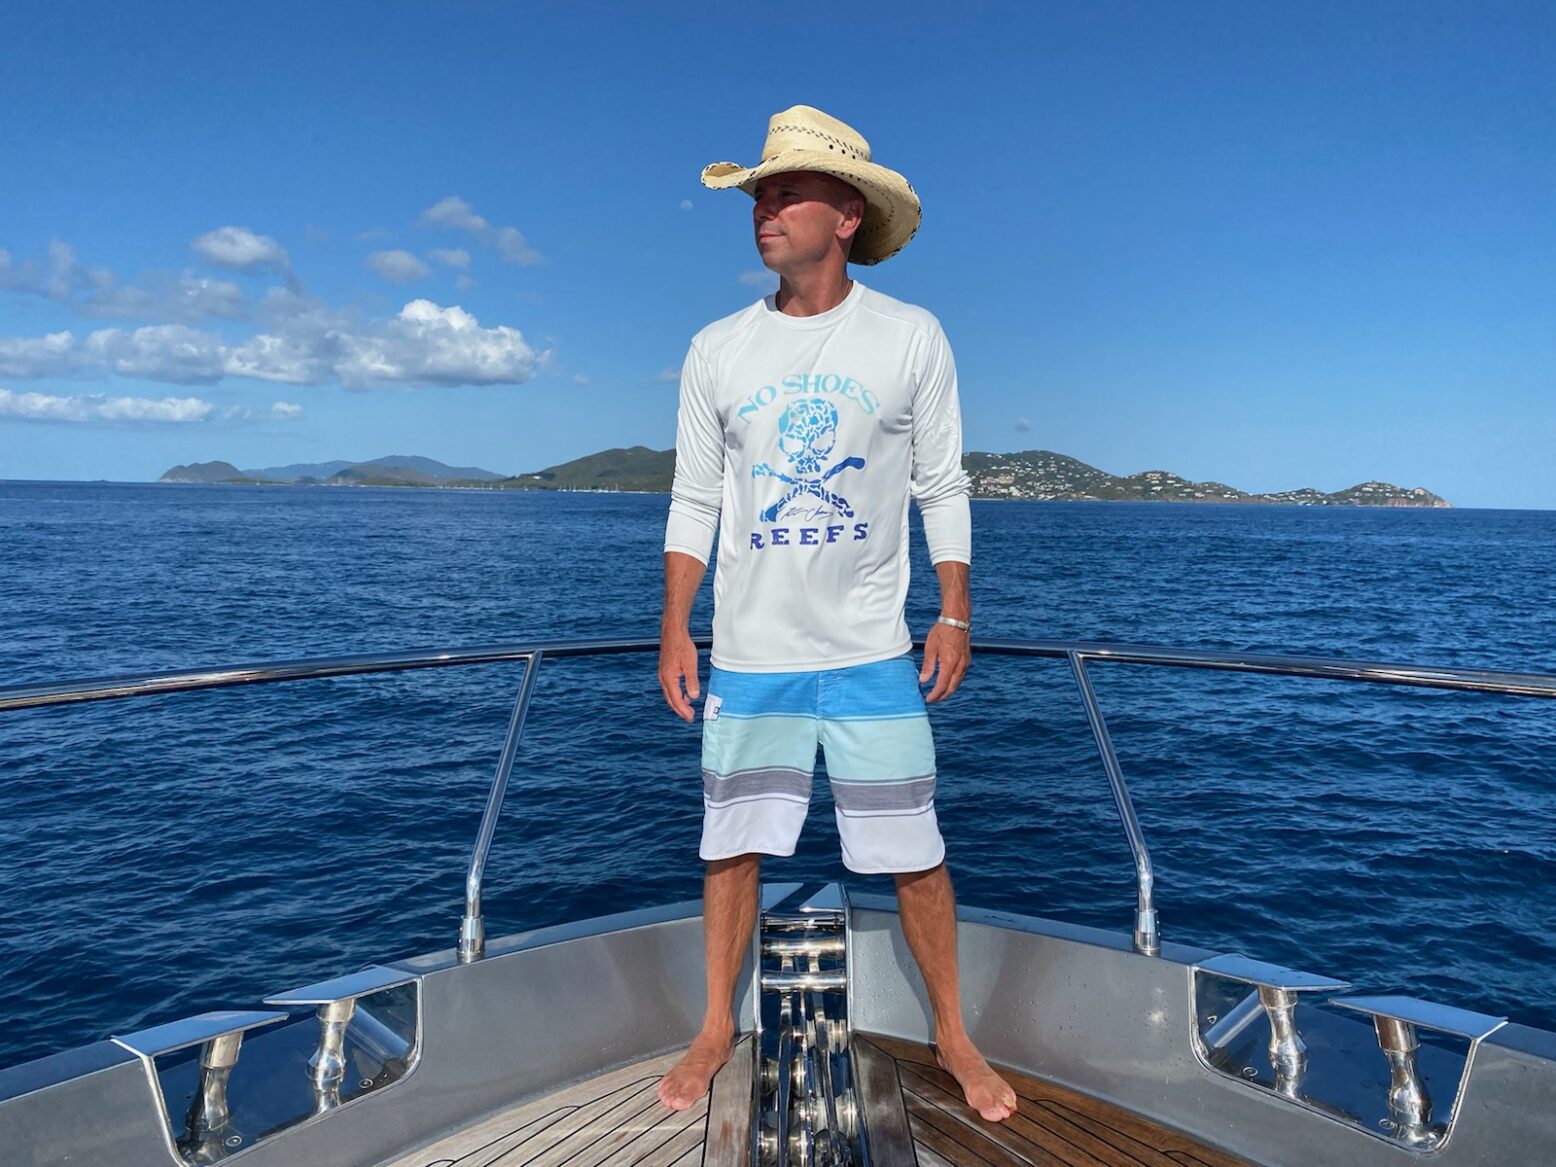 Kenny Chesney's 'No Shoes Reefs' Teams With 'Tampa Bay Watch'